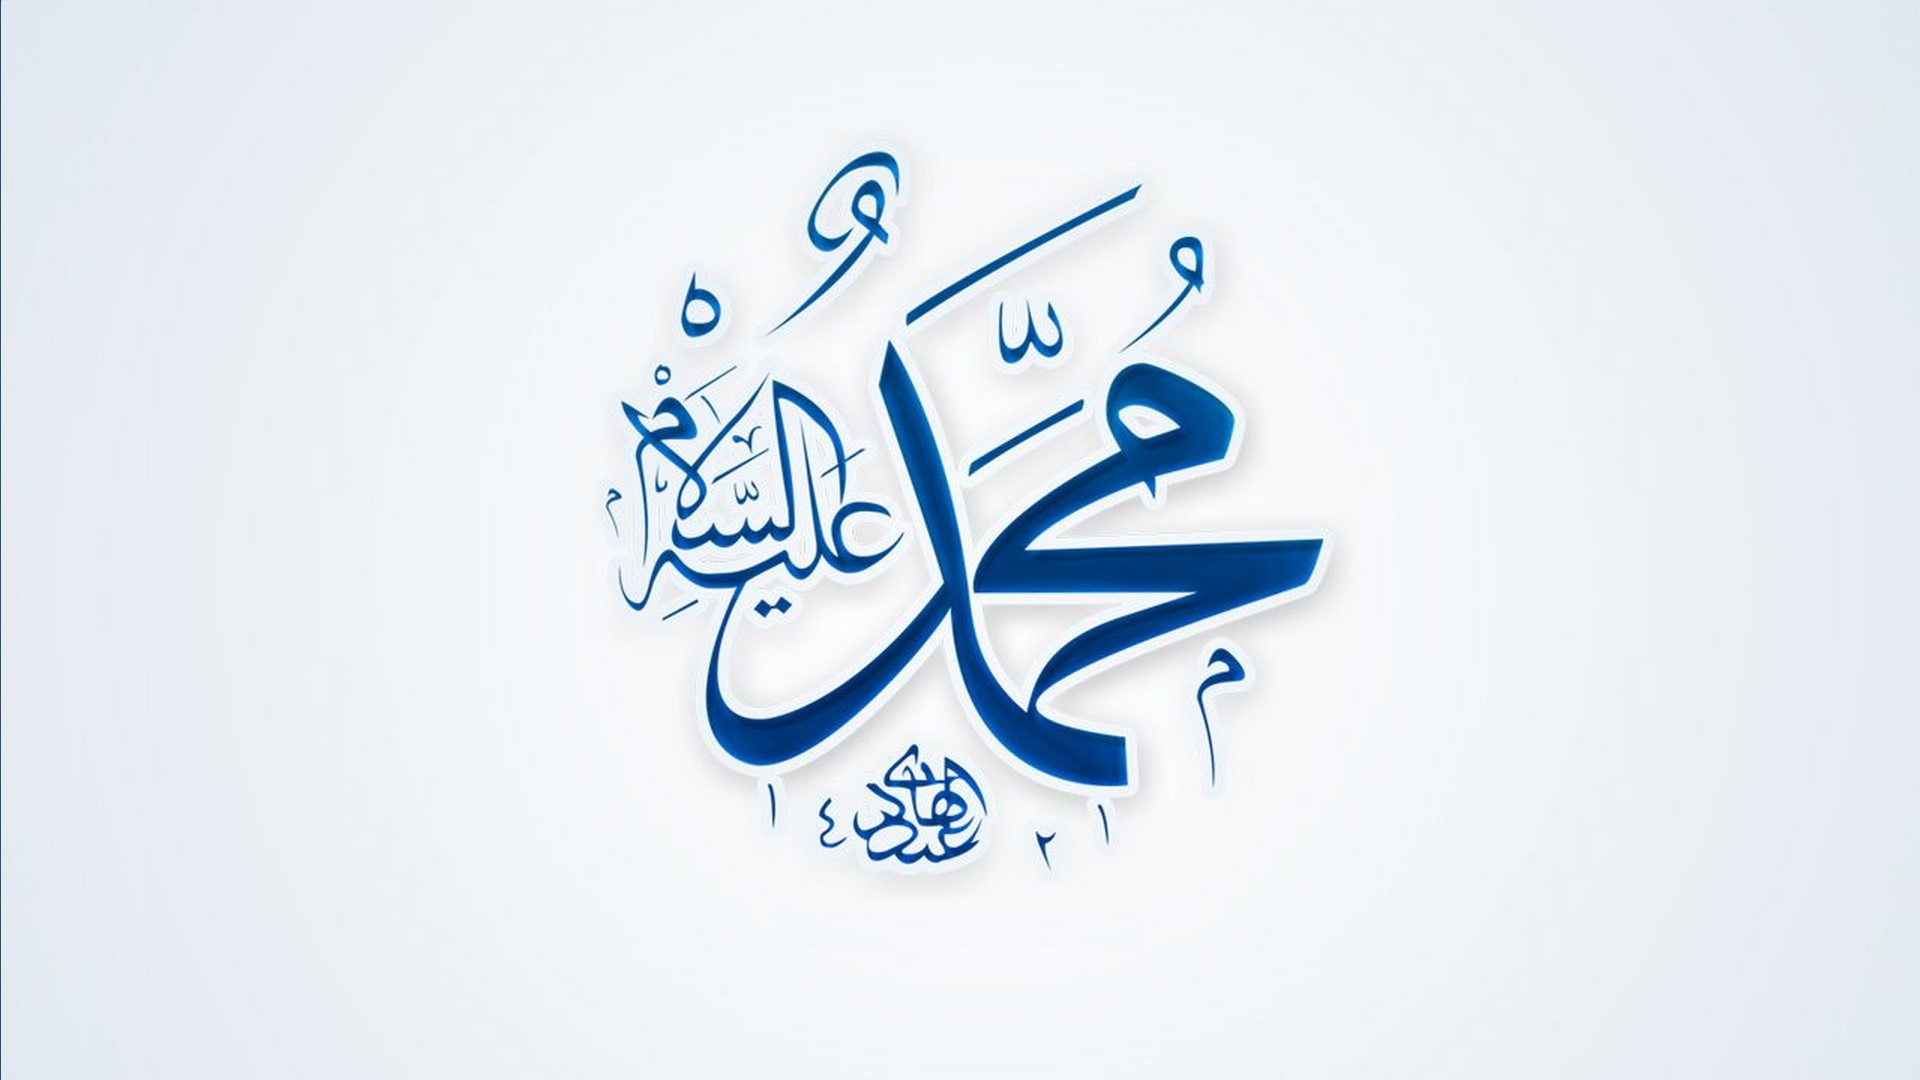 Muhammad Macbook Backgrounds With high-resolution 1920X1080 pixel. You can use and set as wallpaper for Notebook Screensavers, Mac Wallpapers, Mobile Home Screen, iPhone or Android Phones Lock Screen